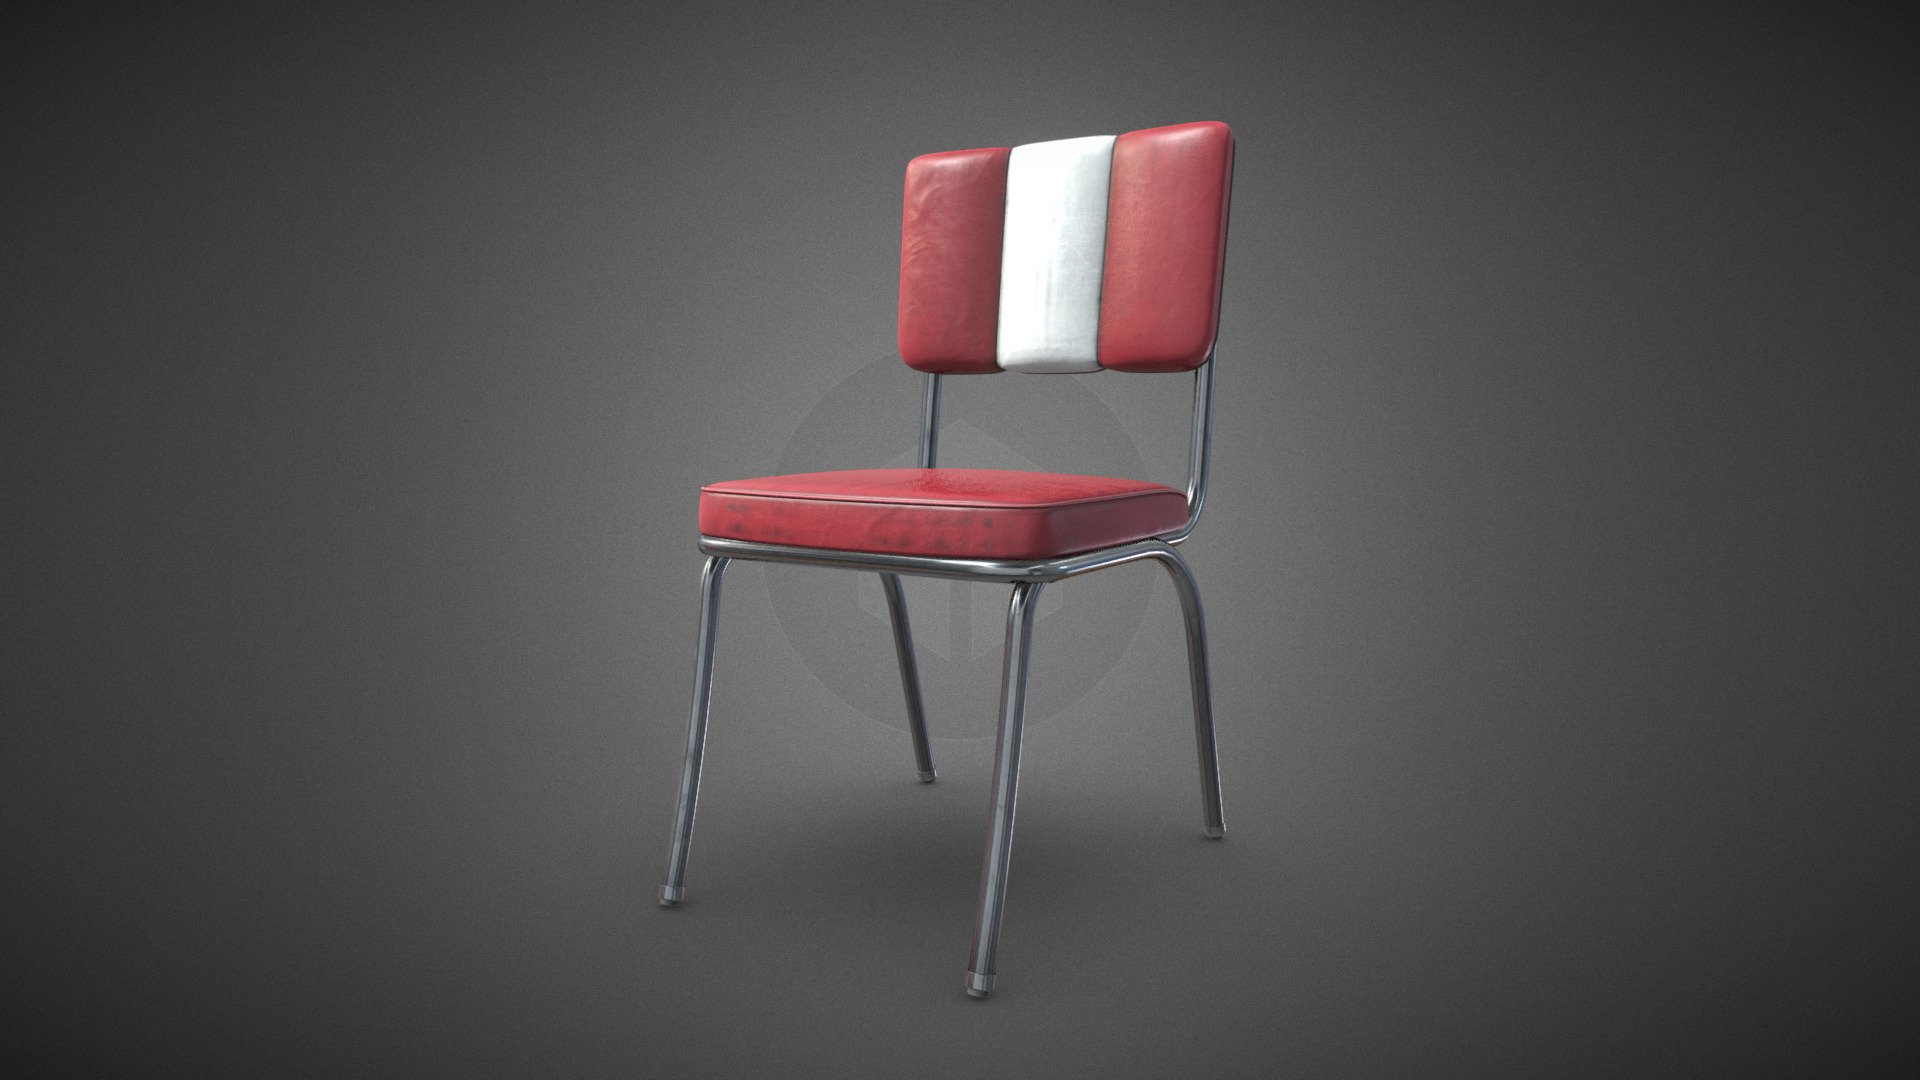 You can use this model for your architectural scene or environment.

Check out some render with this model here : https://www.behance.net/gallery/73212049/Adobe-Stock-Retro-Chair

This Model is also available on 3D Adobe stock for Dimension CC 3d model